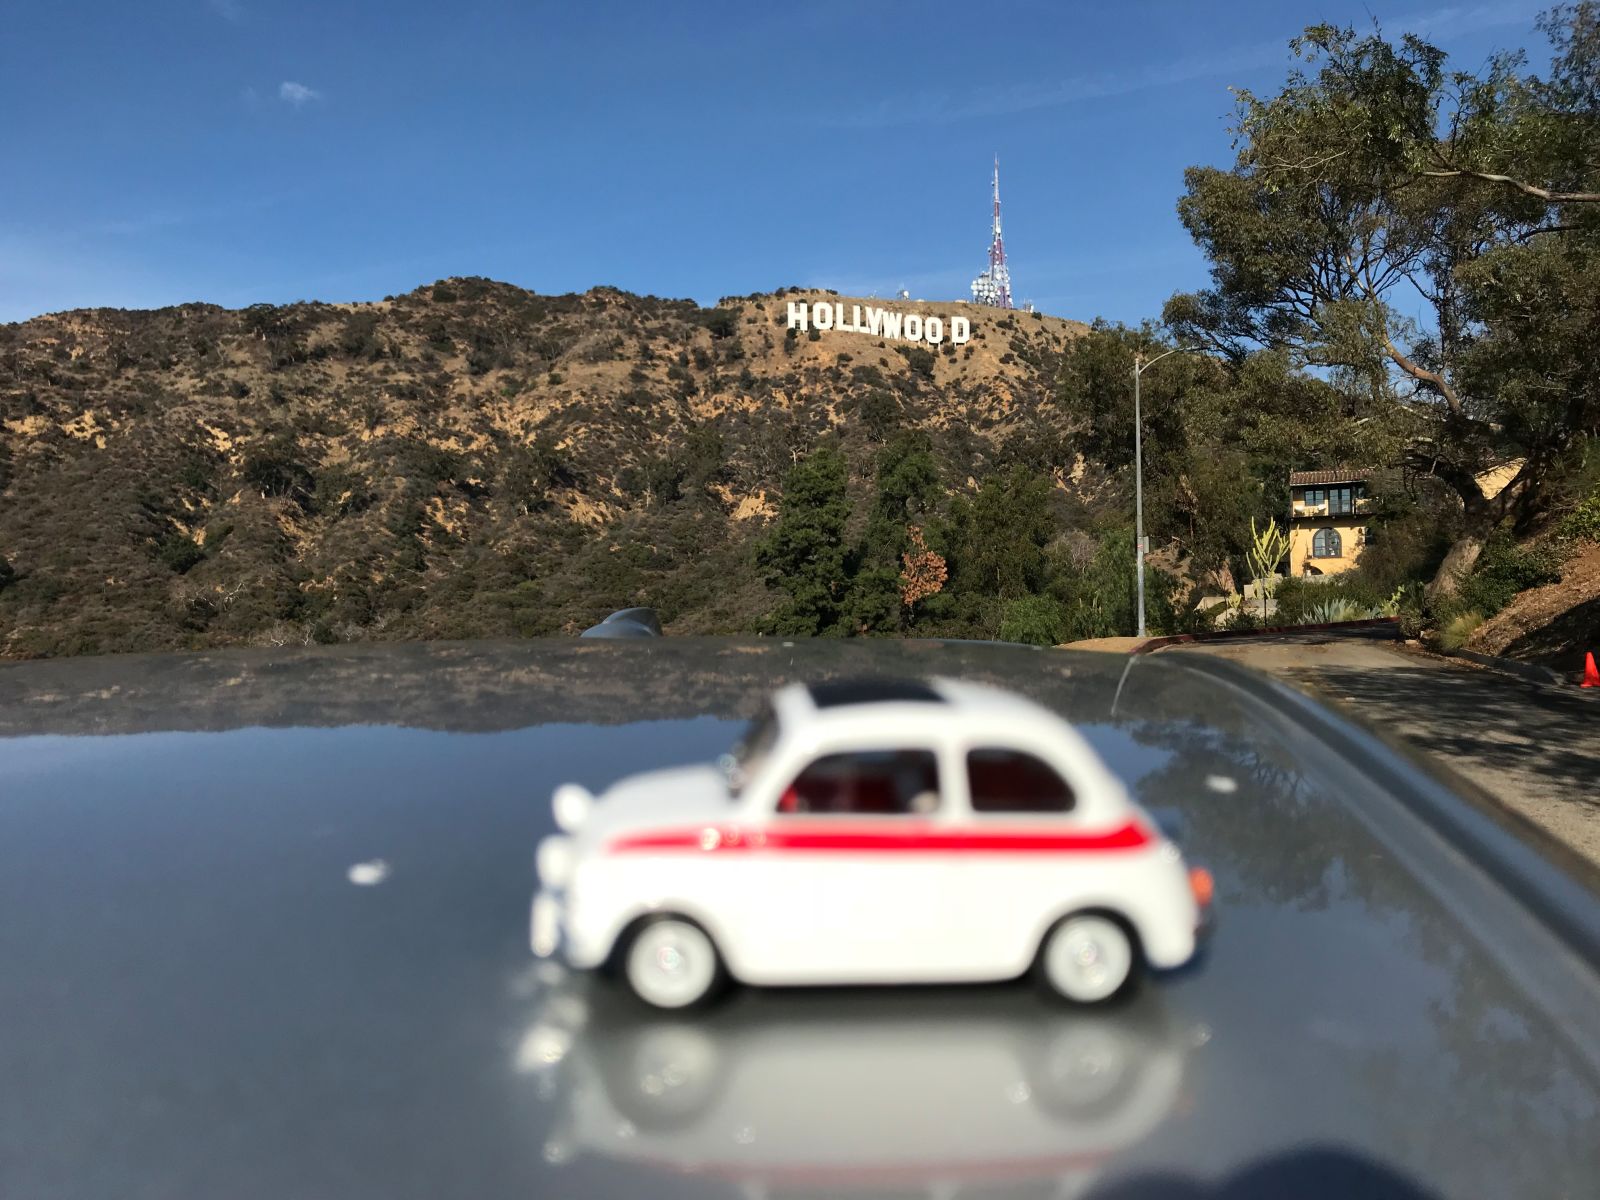 Illustration for article titled Fiat Friday: Un Cinquecento Americano a Hollywood